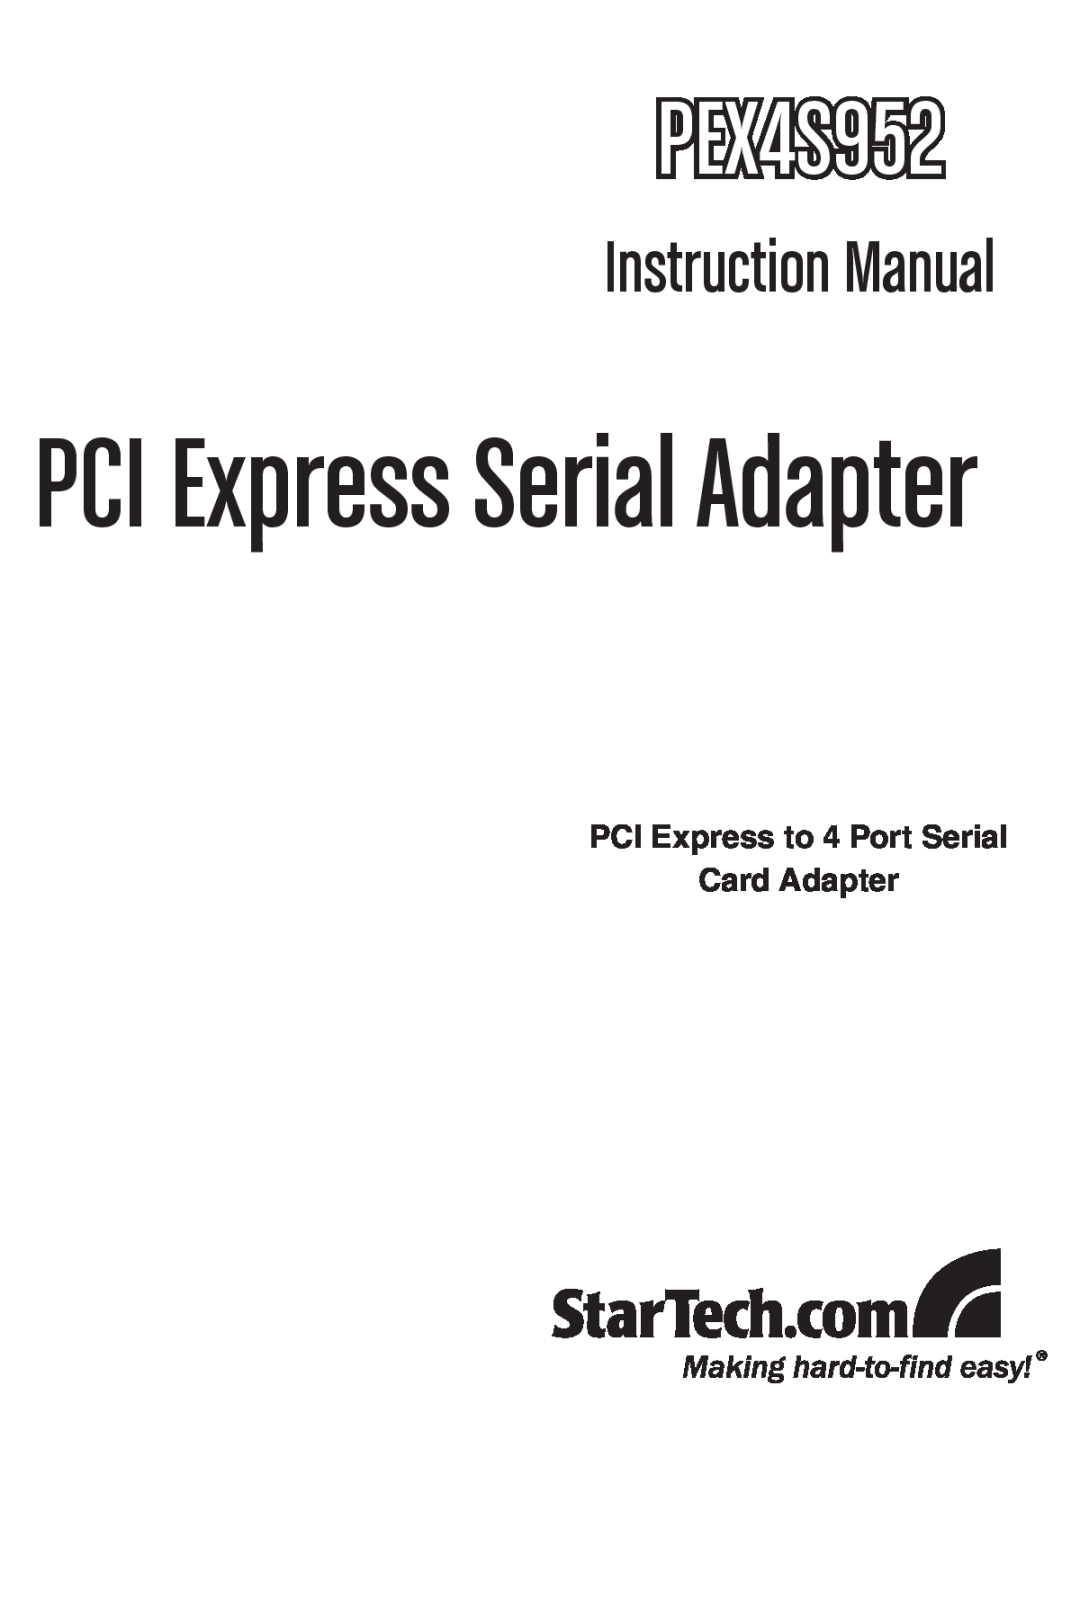 StarTech.com PEX4S952 instruction manual PCI Express to 4 Port Serial Card Adapter, PCI Express Serial Adapter 